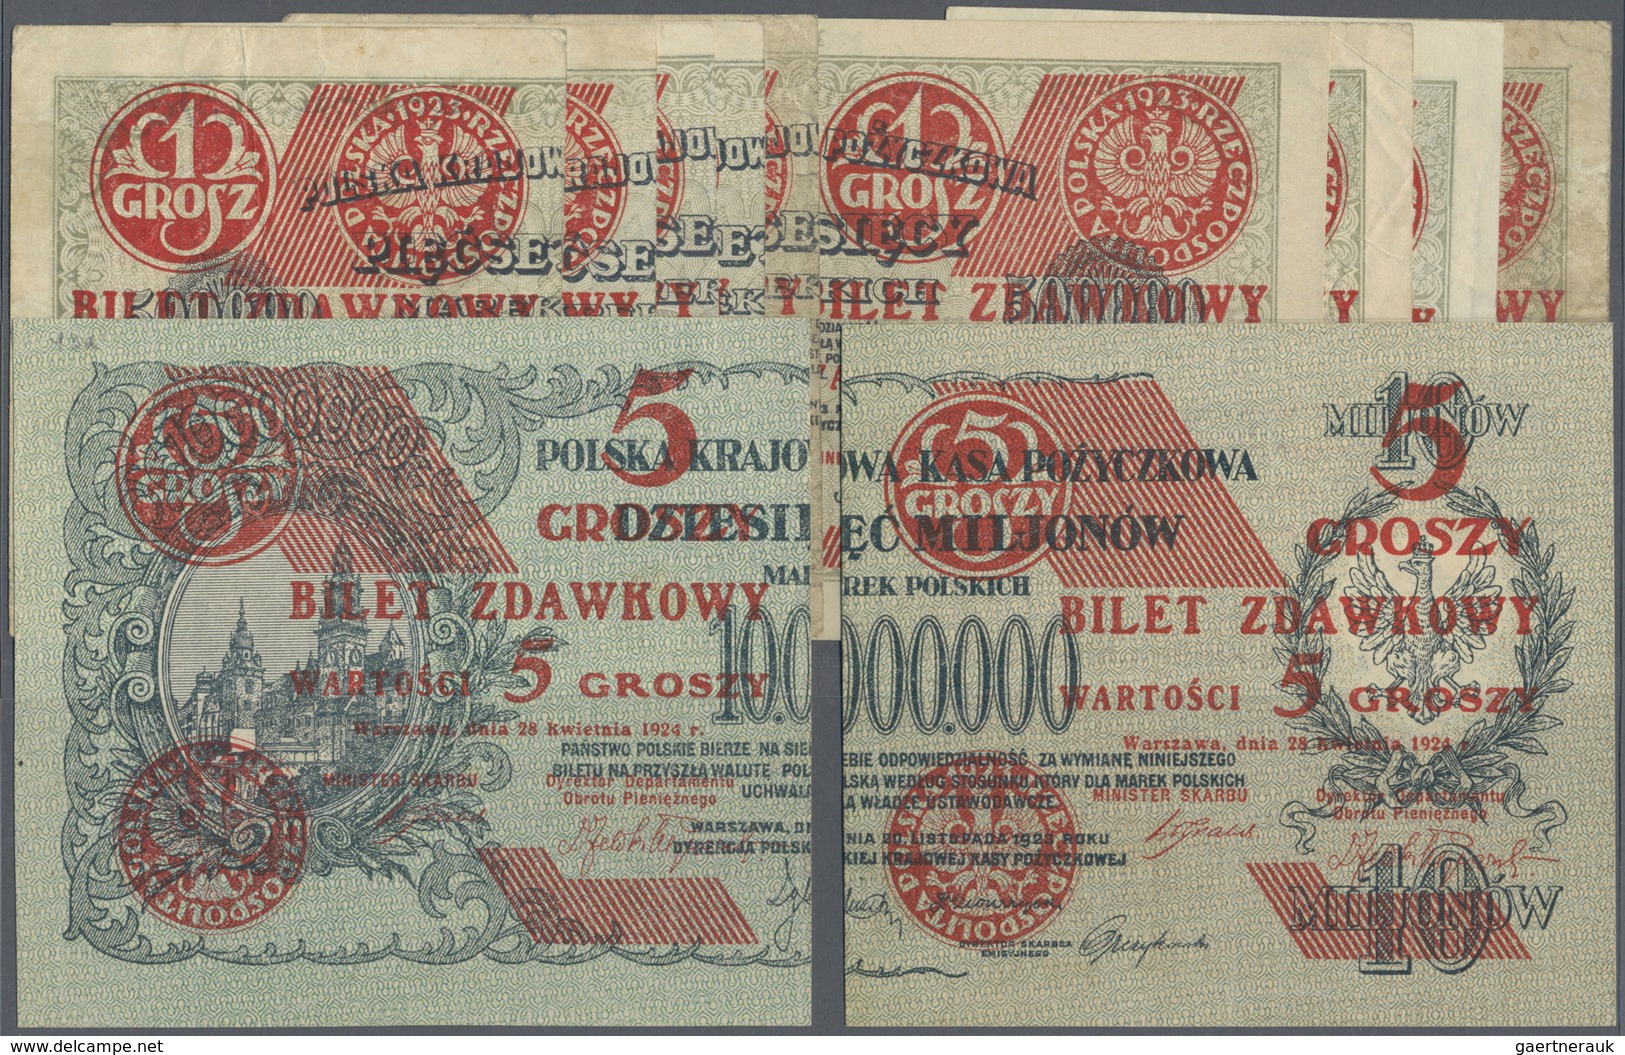 Poland / Polen: Very Nice Set With 11 Banknotes Of The 1924 Provisional "Cut In Half" Bilet Zdawkowy - Poland